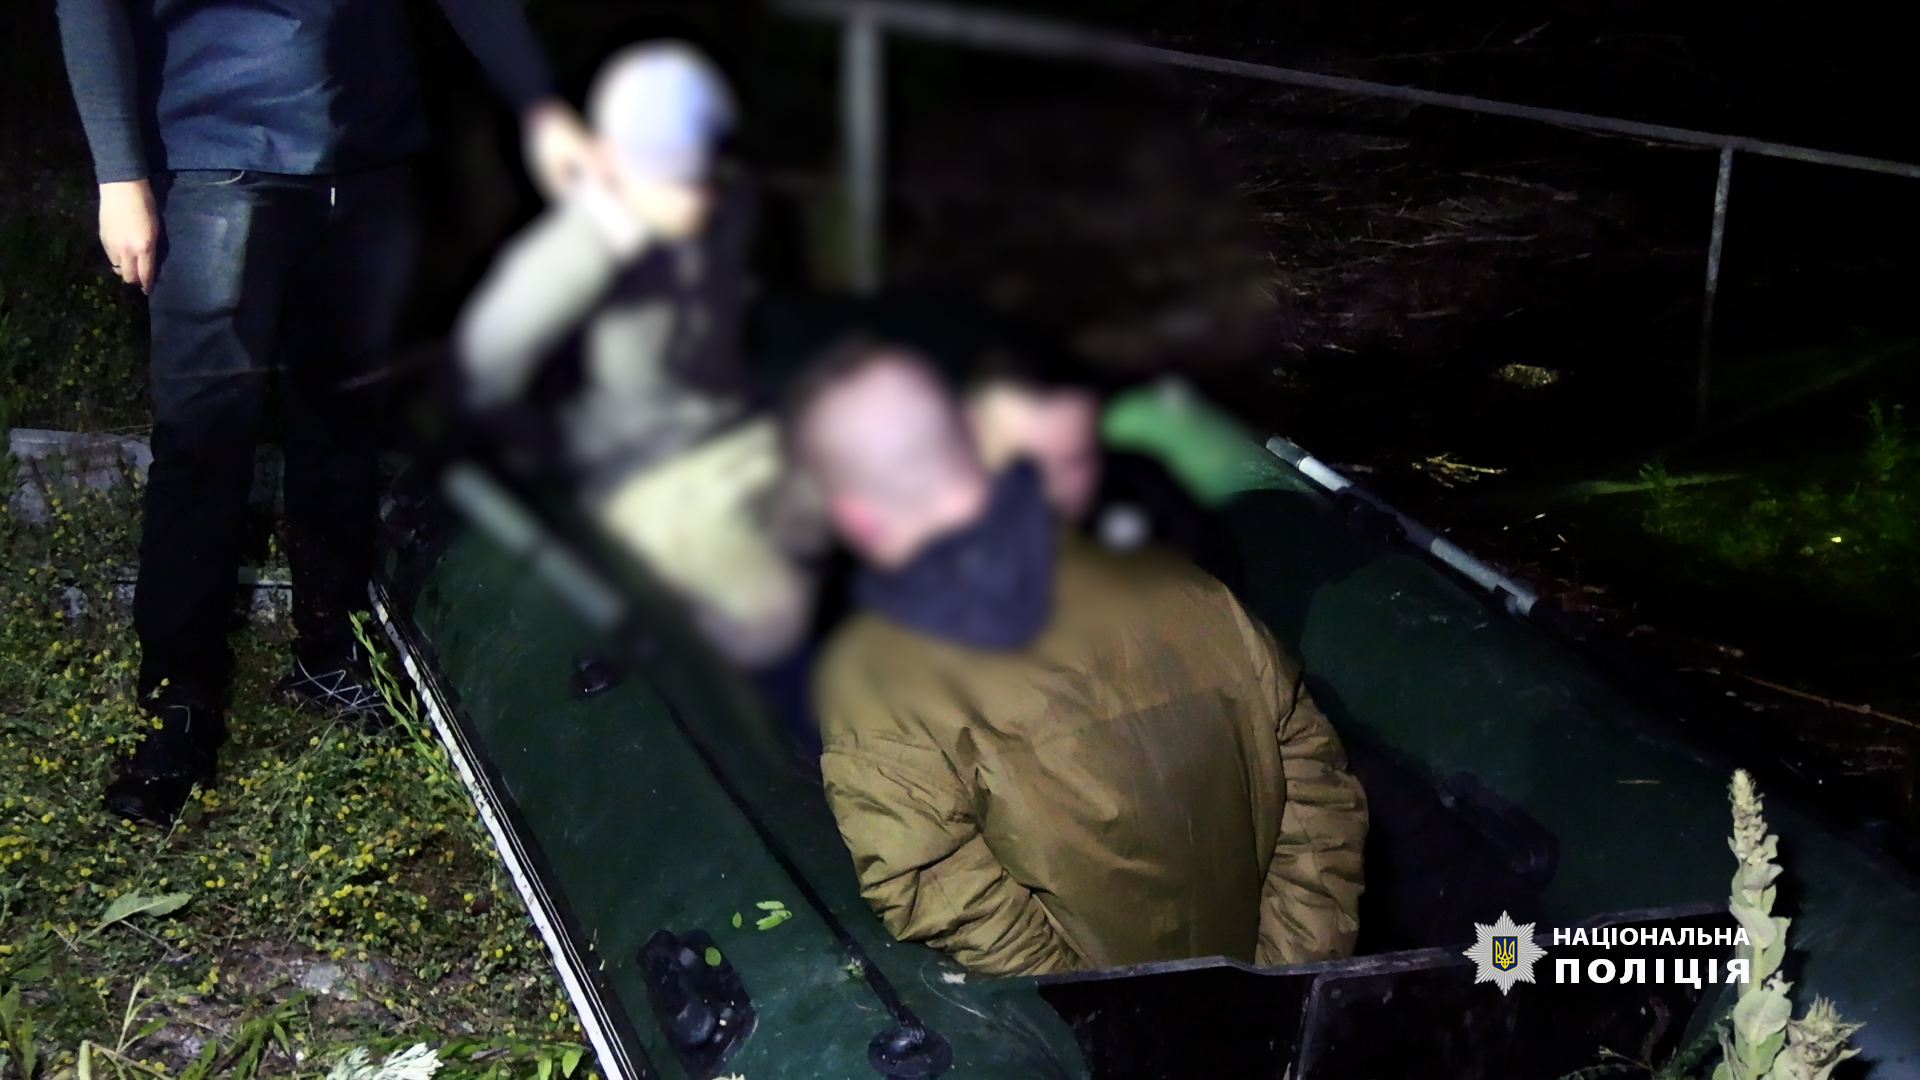 In Vinnytsia, law enforcement officers detained criminals who were transporting men across the border by boat